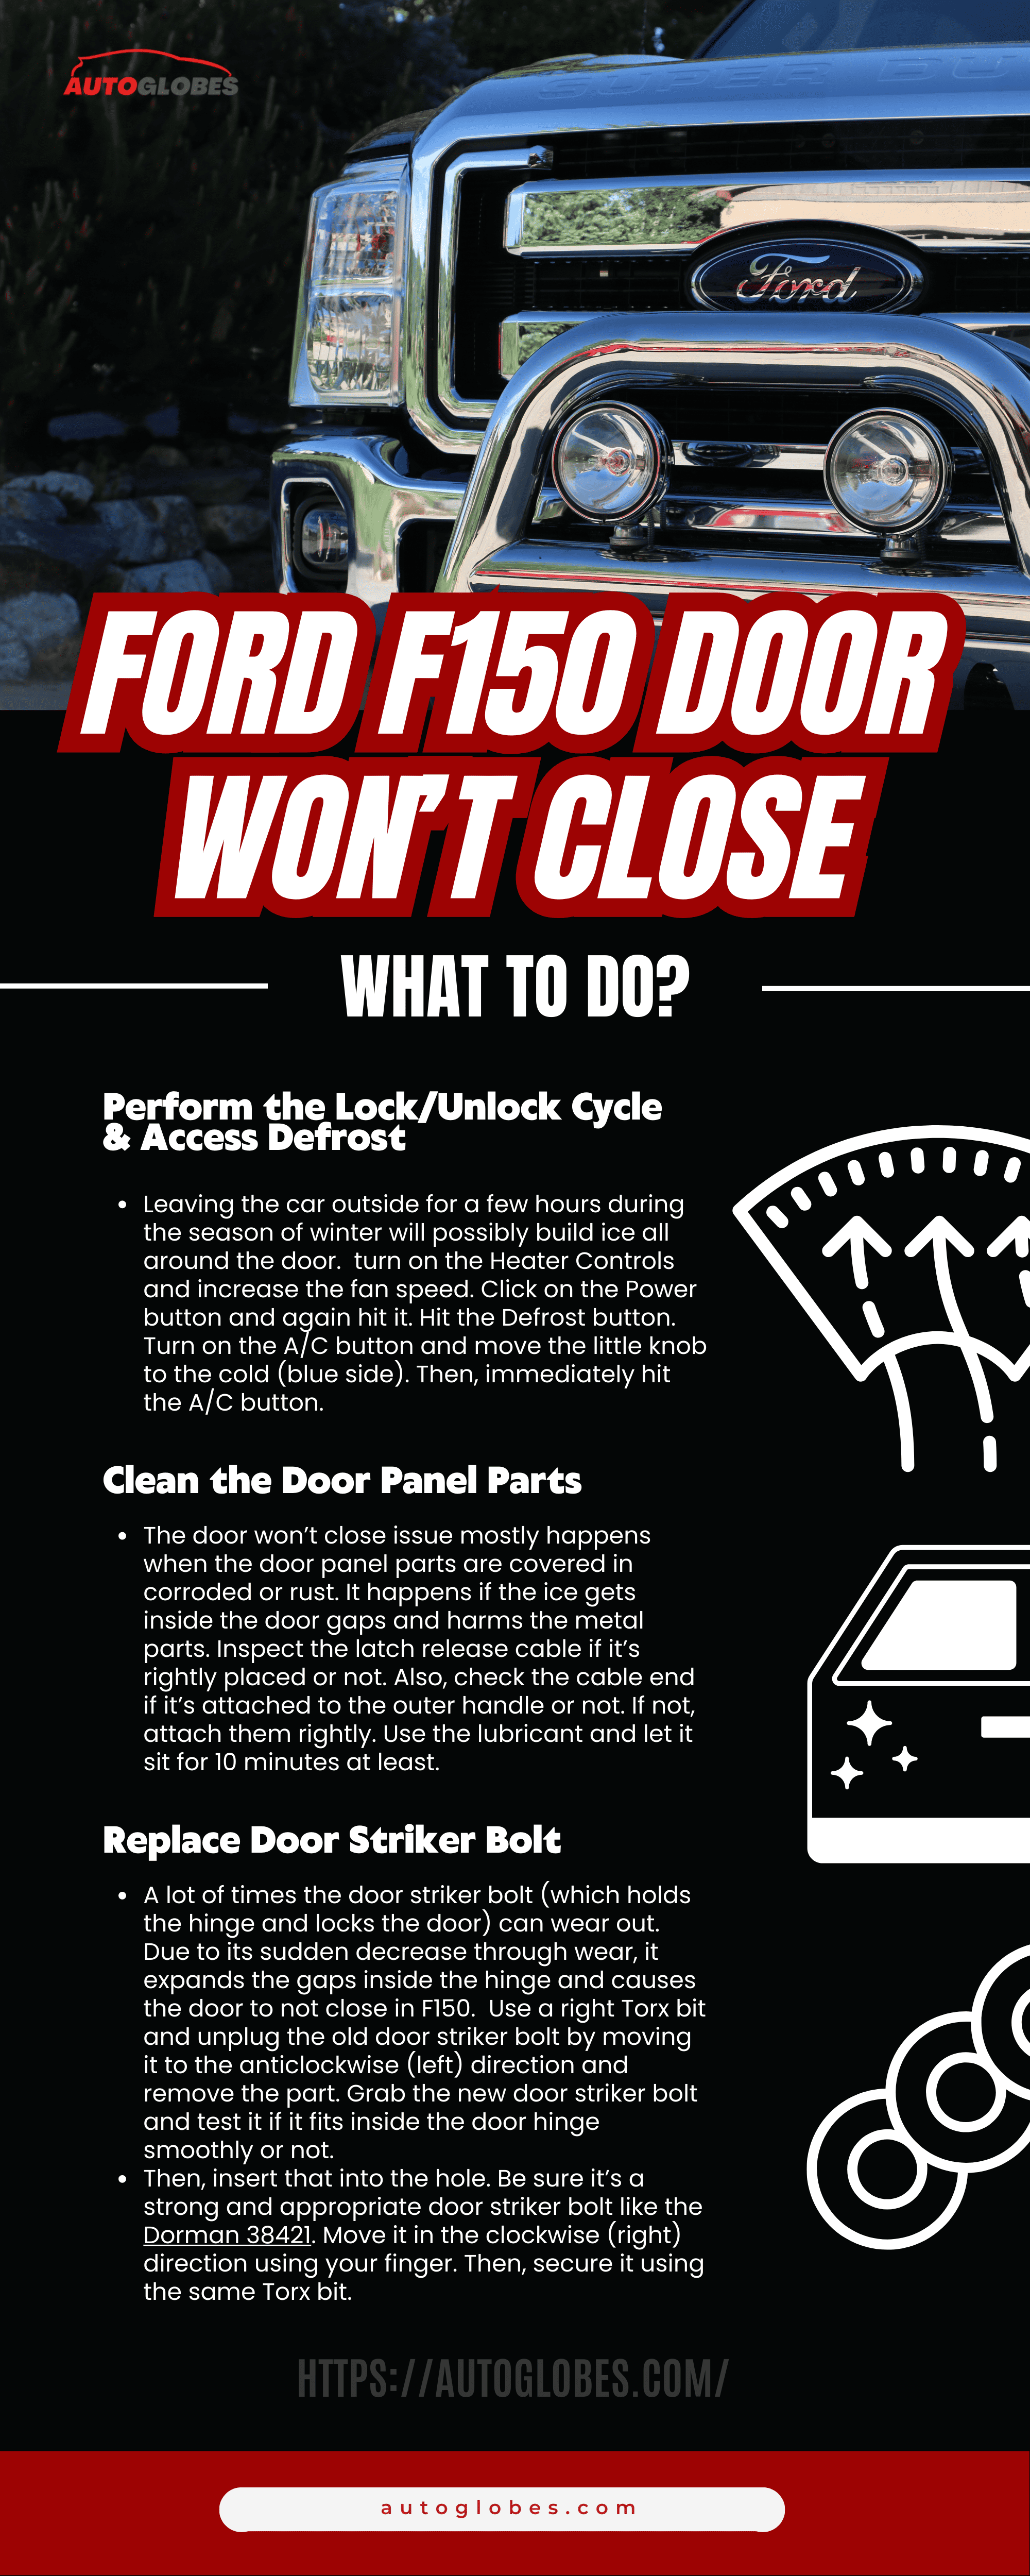 Ford F150 Door Won’t Close Infographic